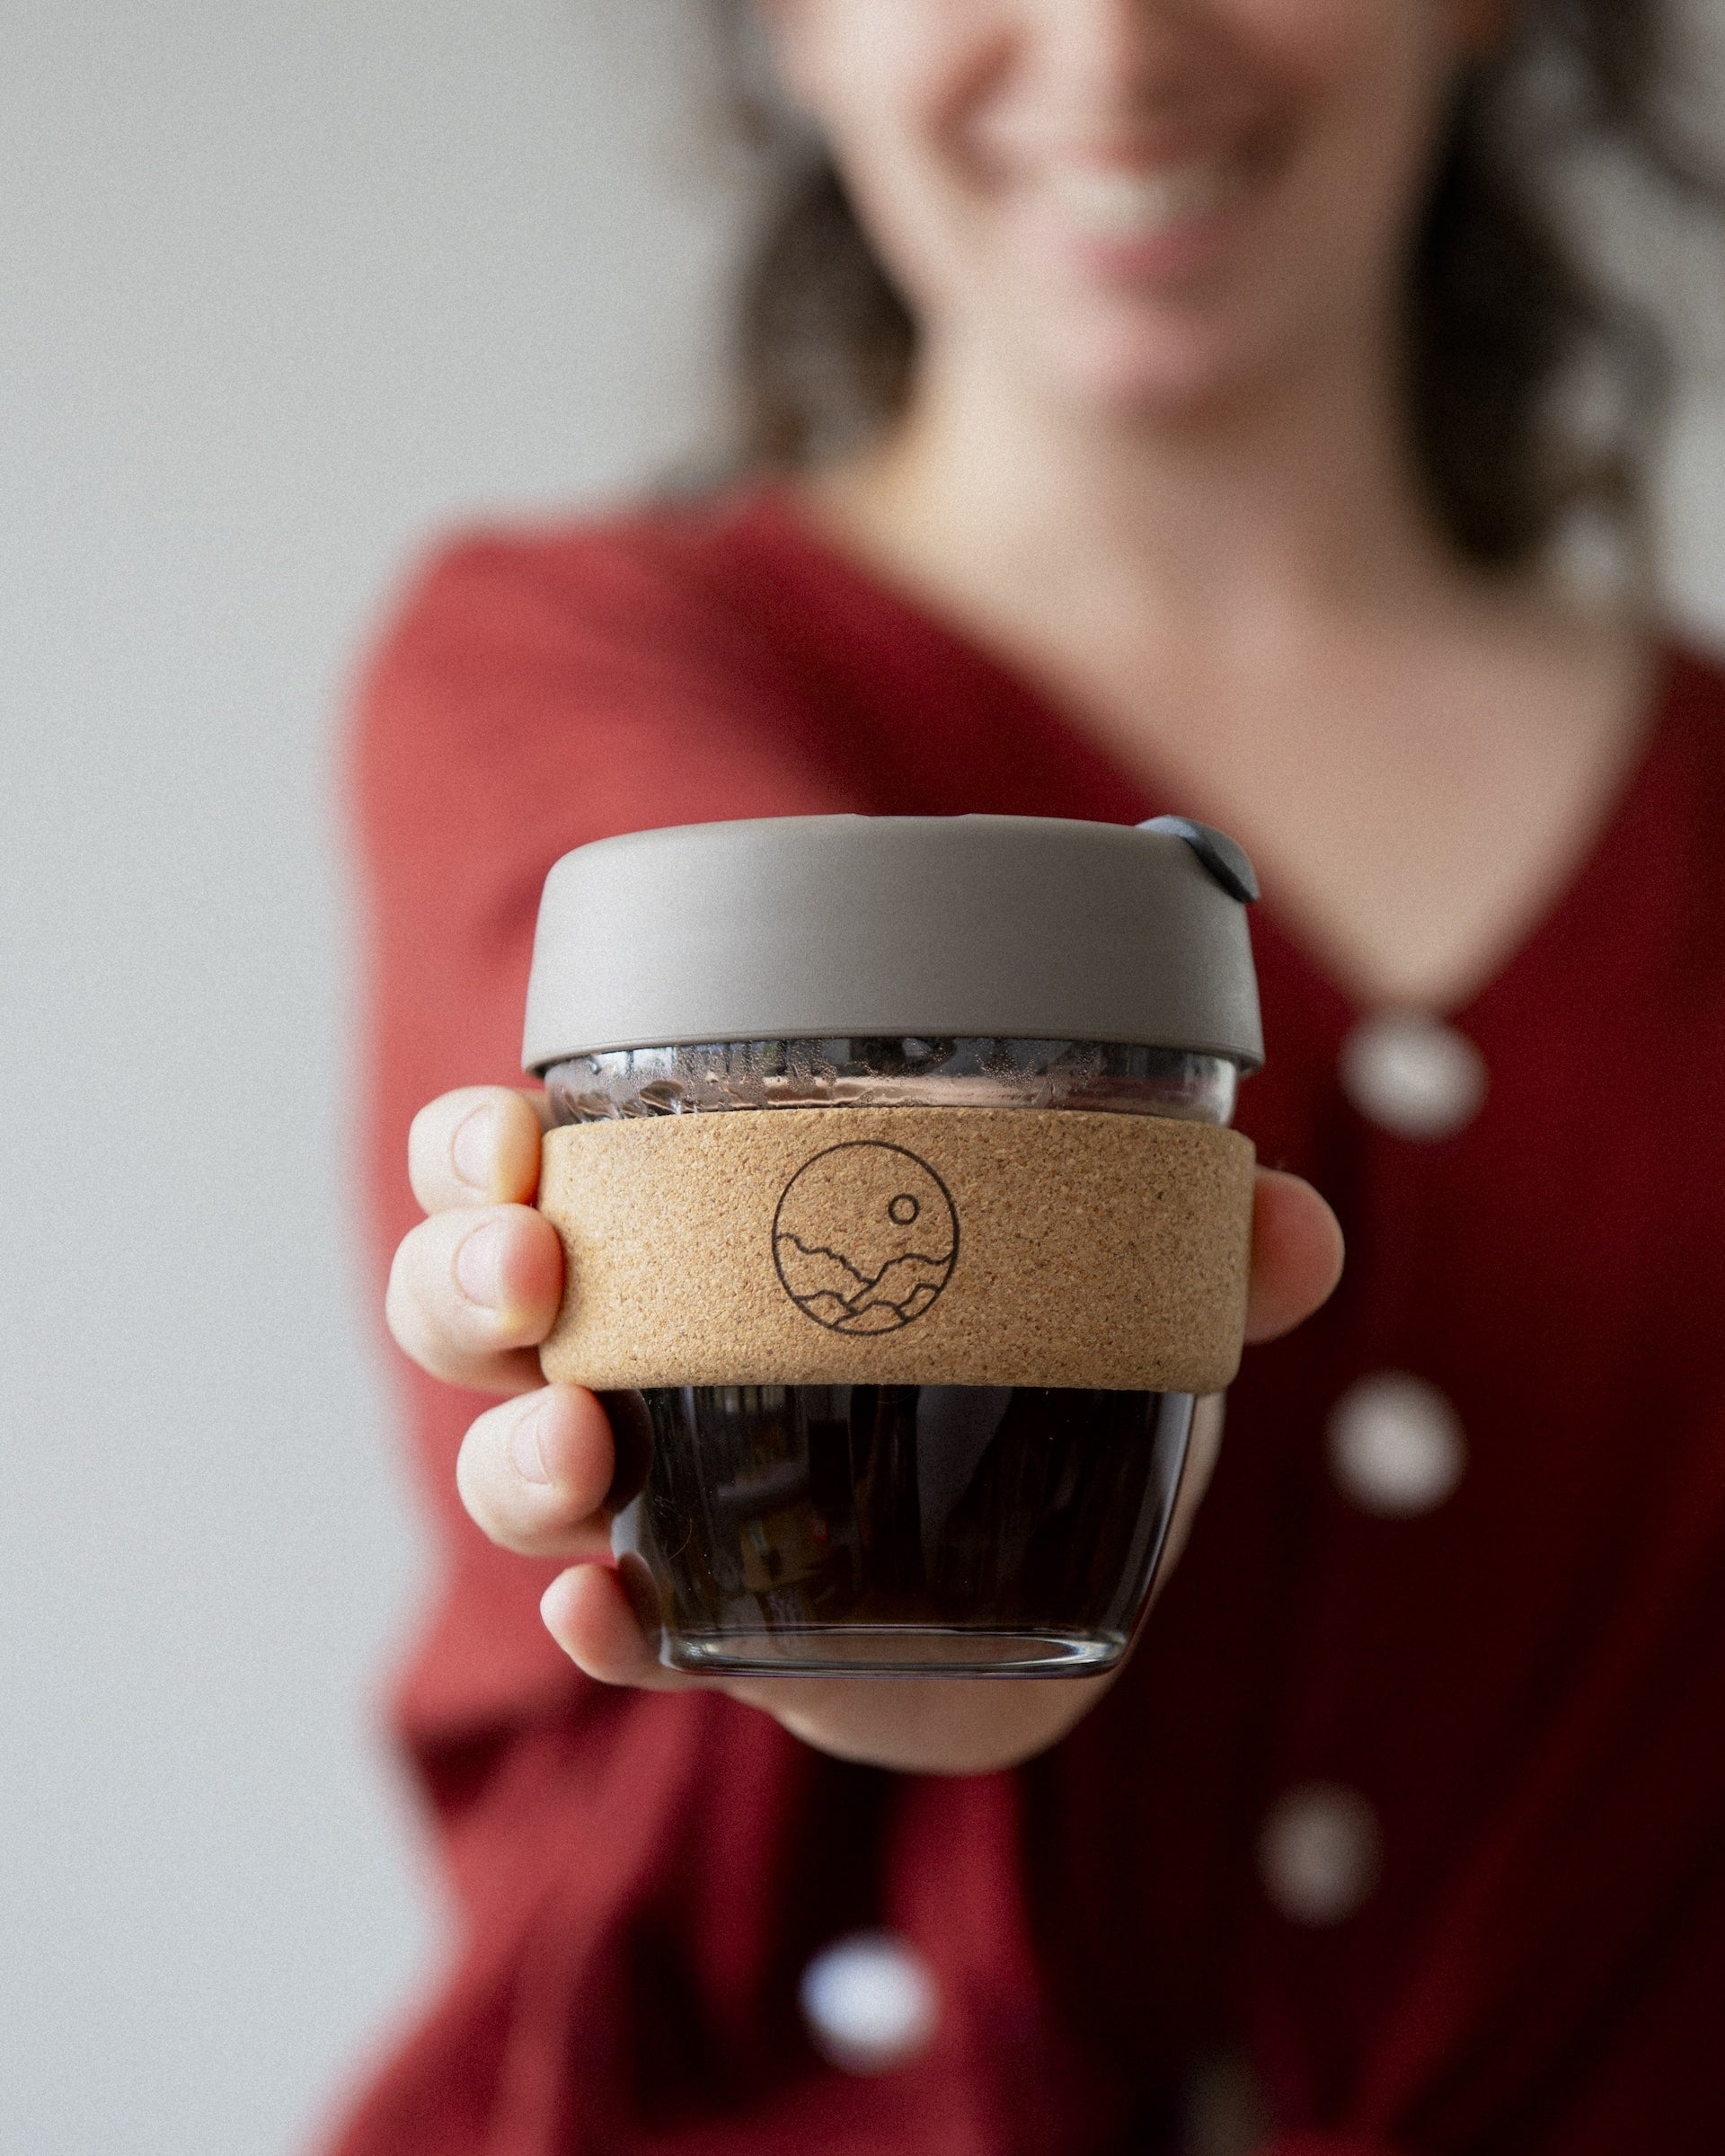 An individual holding a Keep Cup, a glass takeaway coffee cup with a cork heat-proof band.